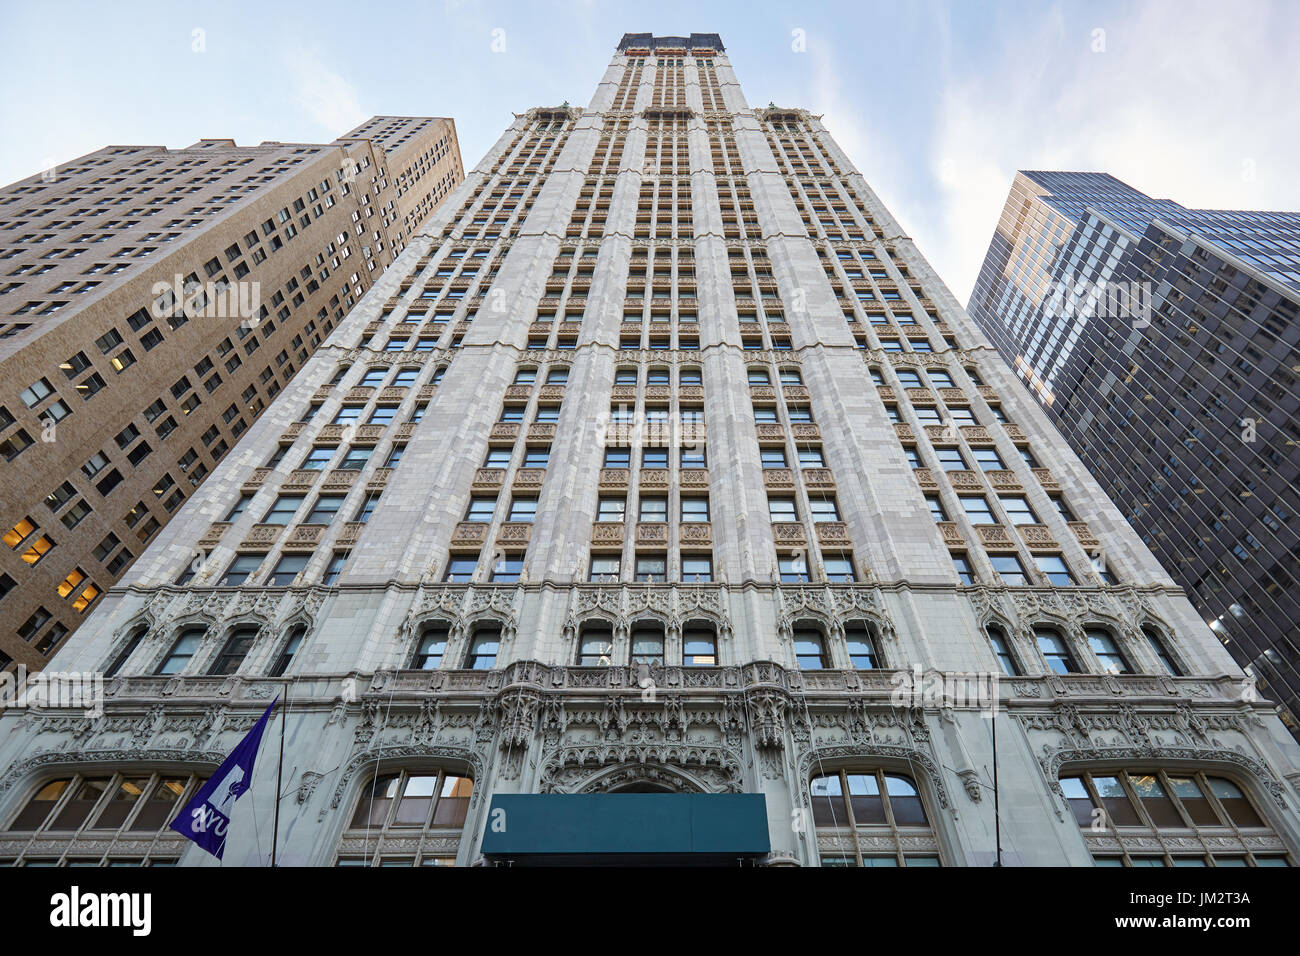 Woolworth Building skyscraper Low Angle View in New York Stockfoto